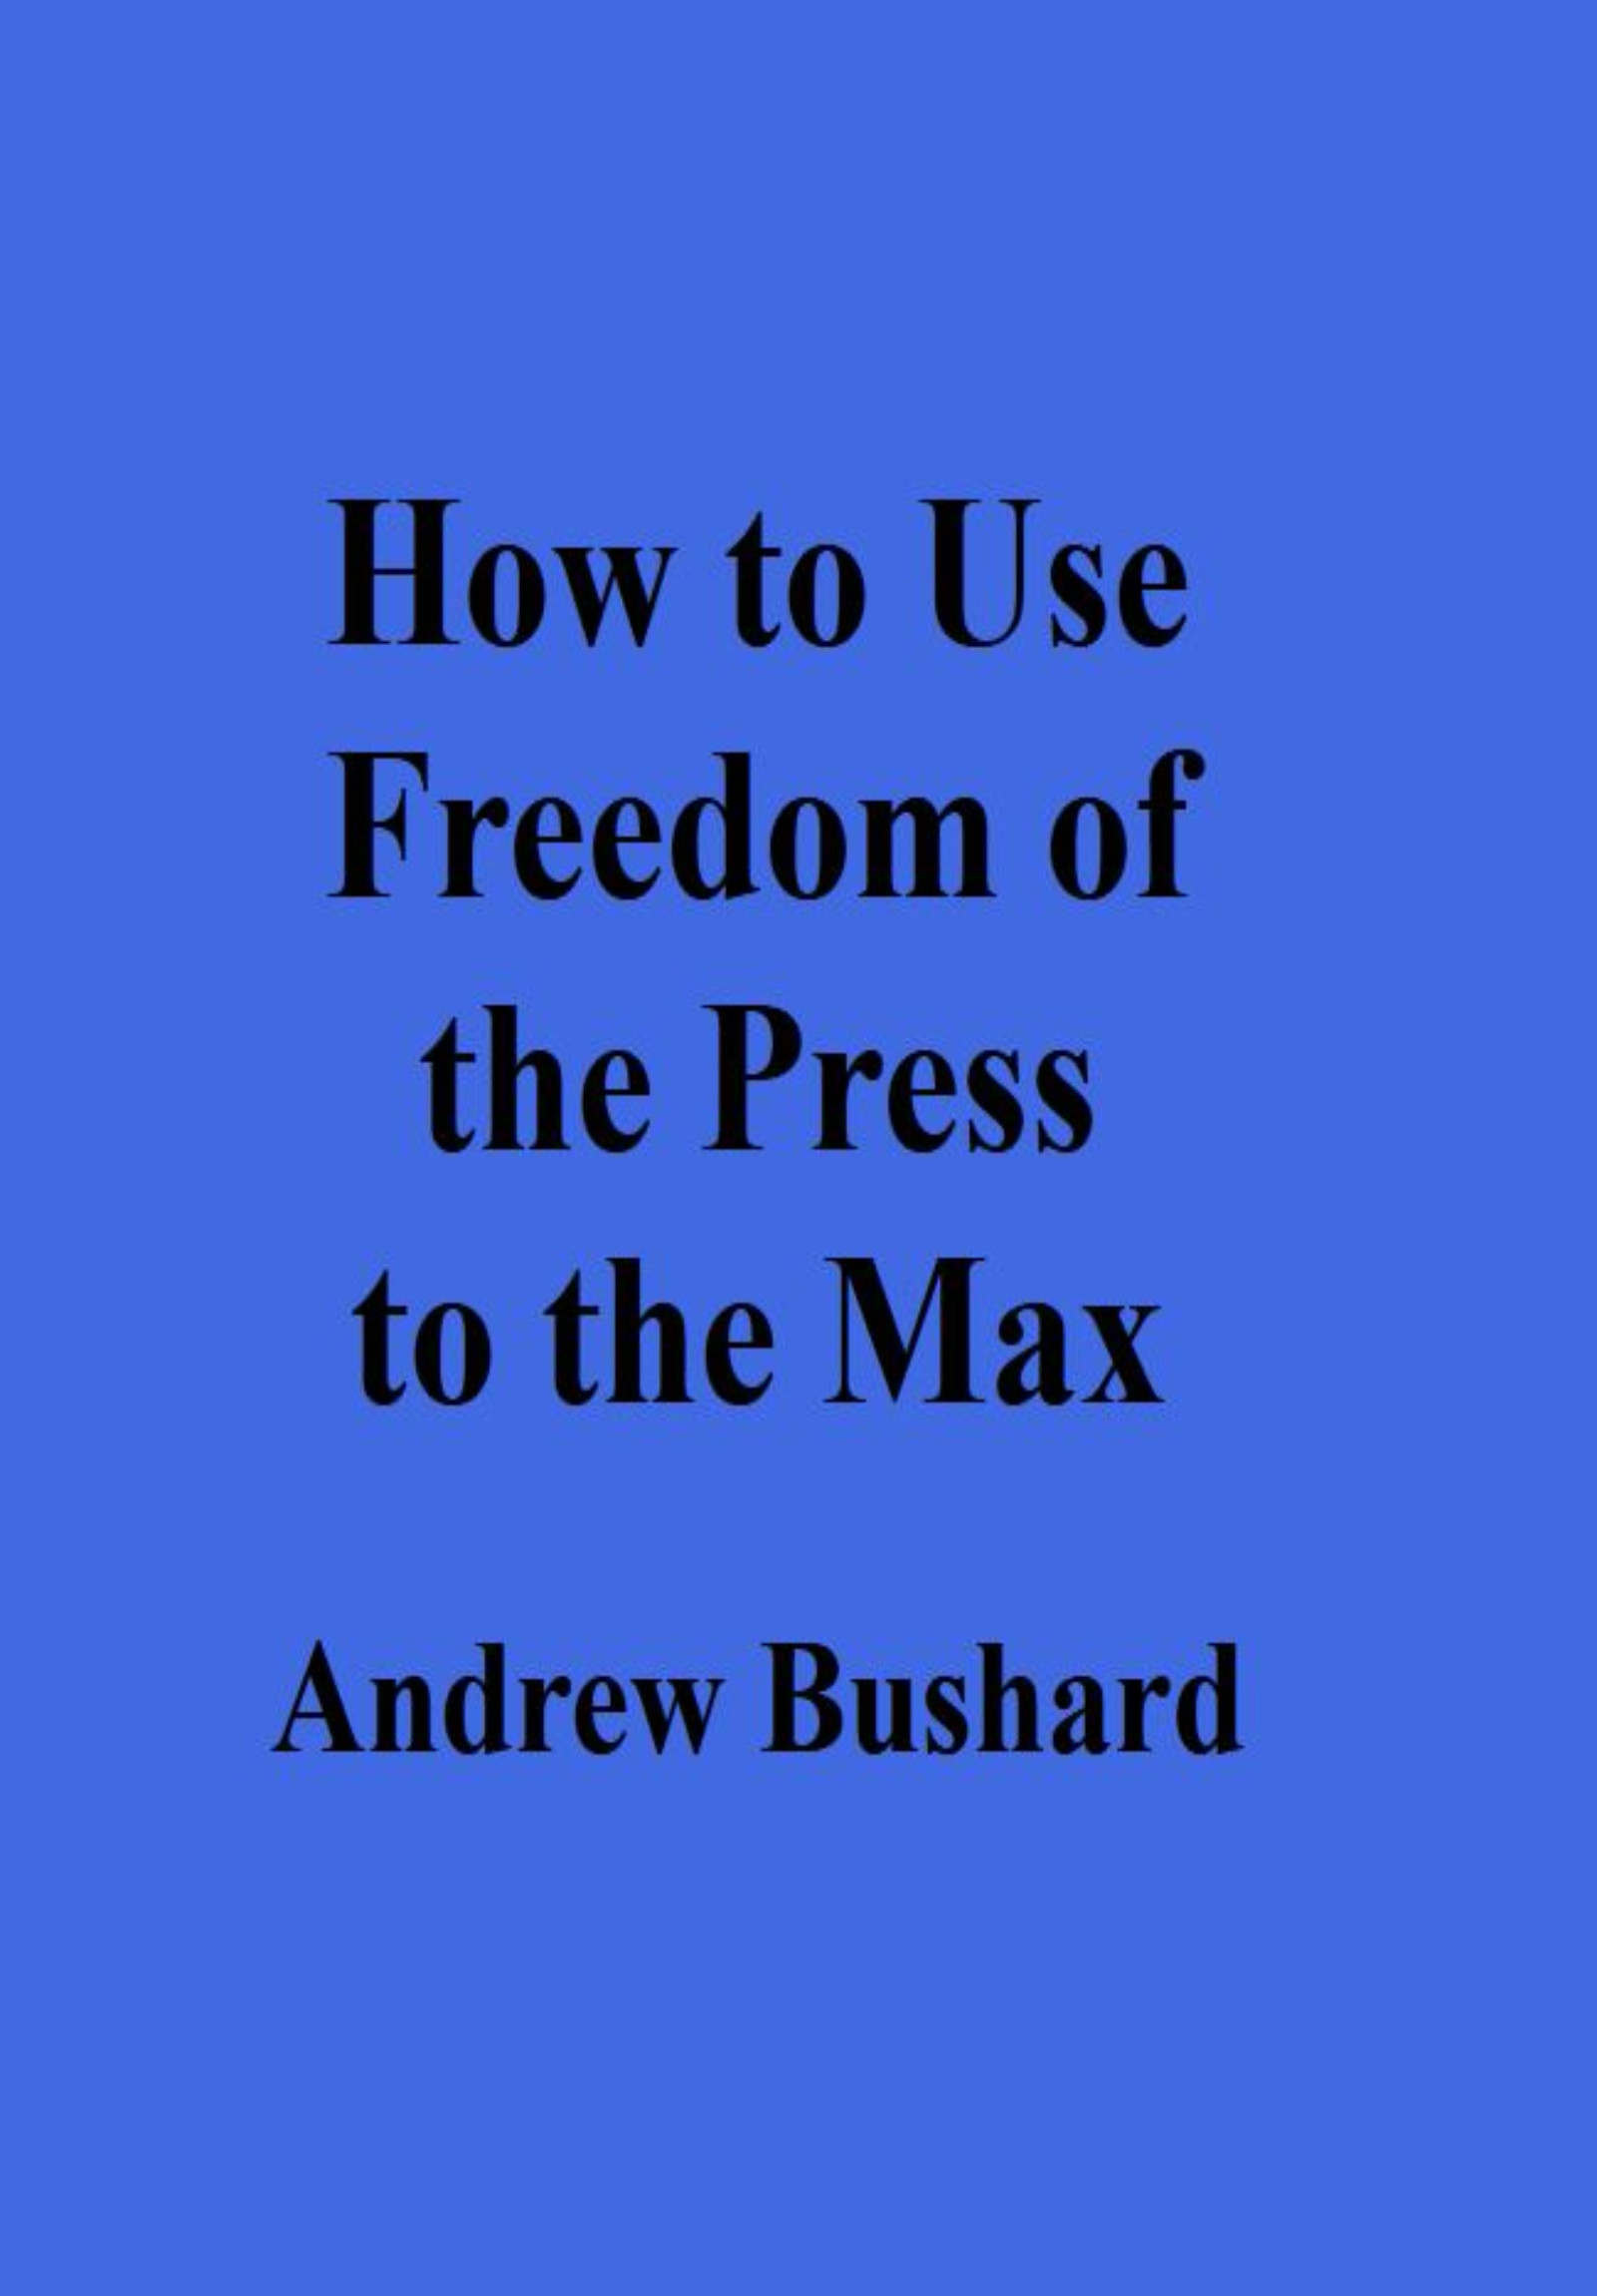 How to Use Freedom of the Press to the Max's featured image